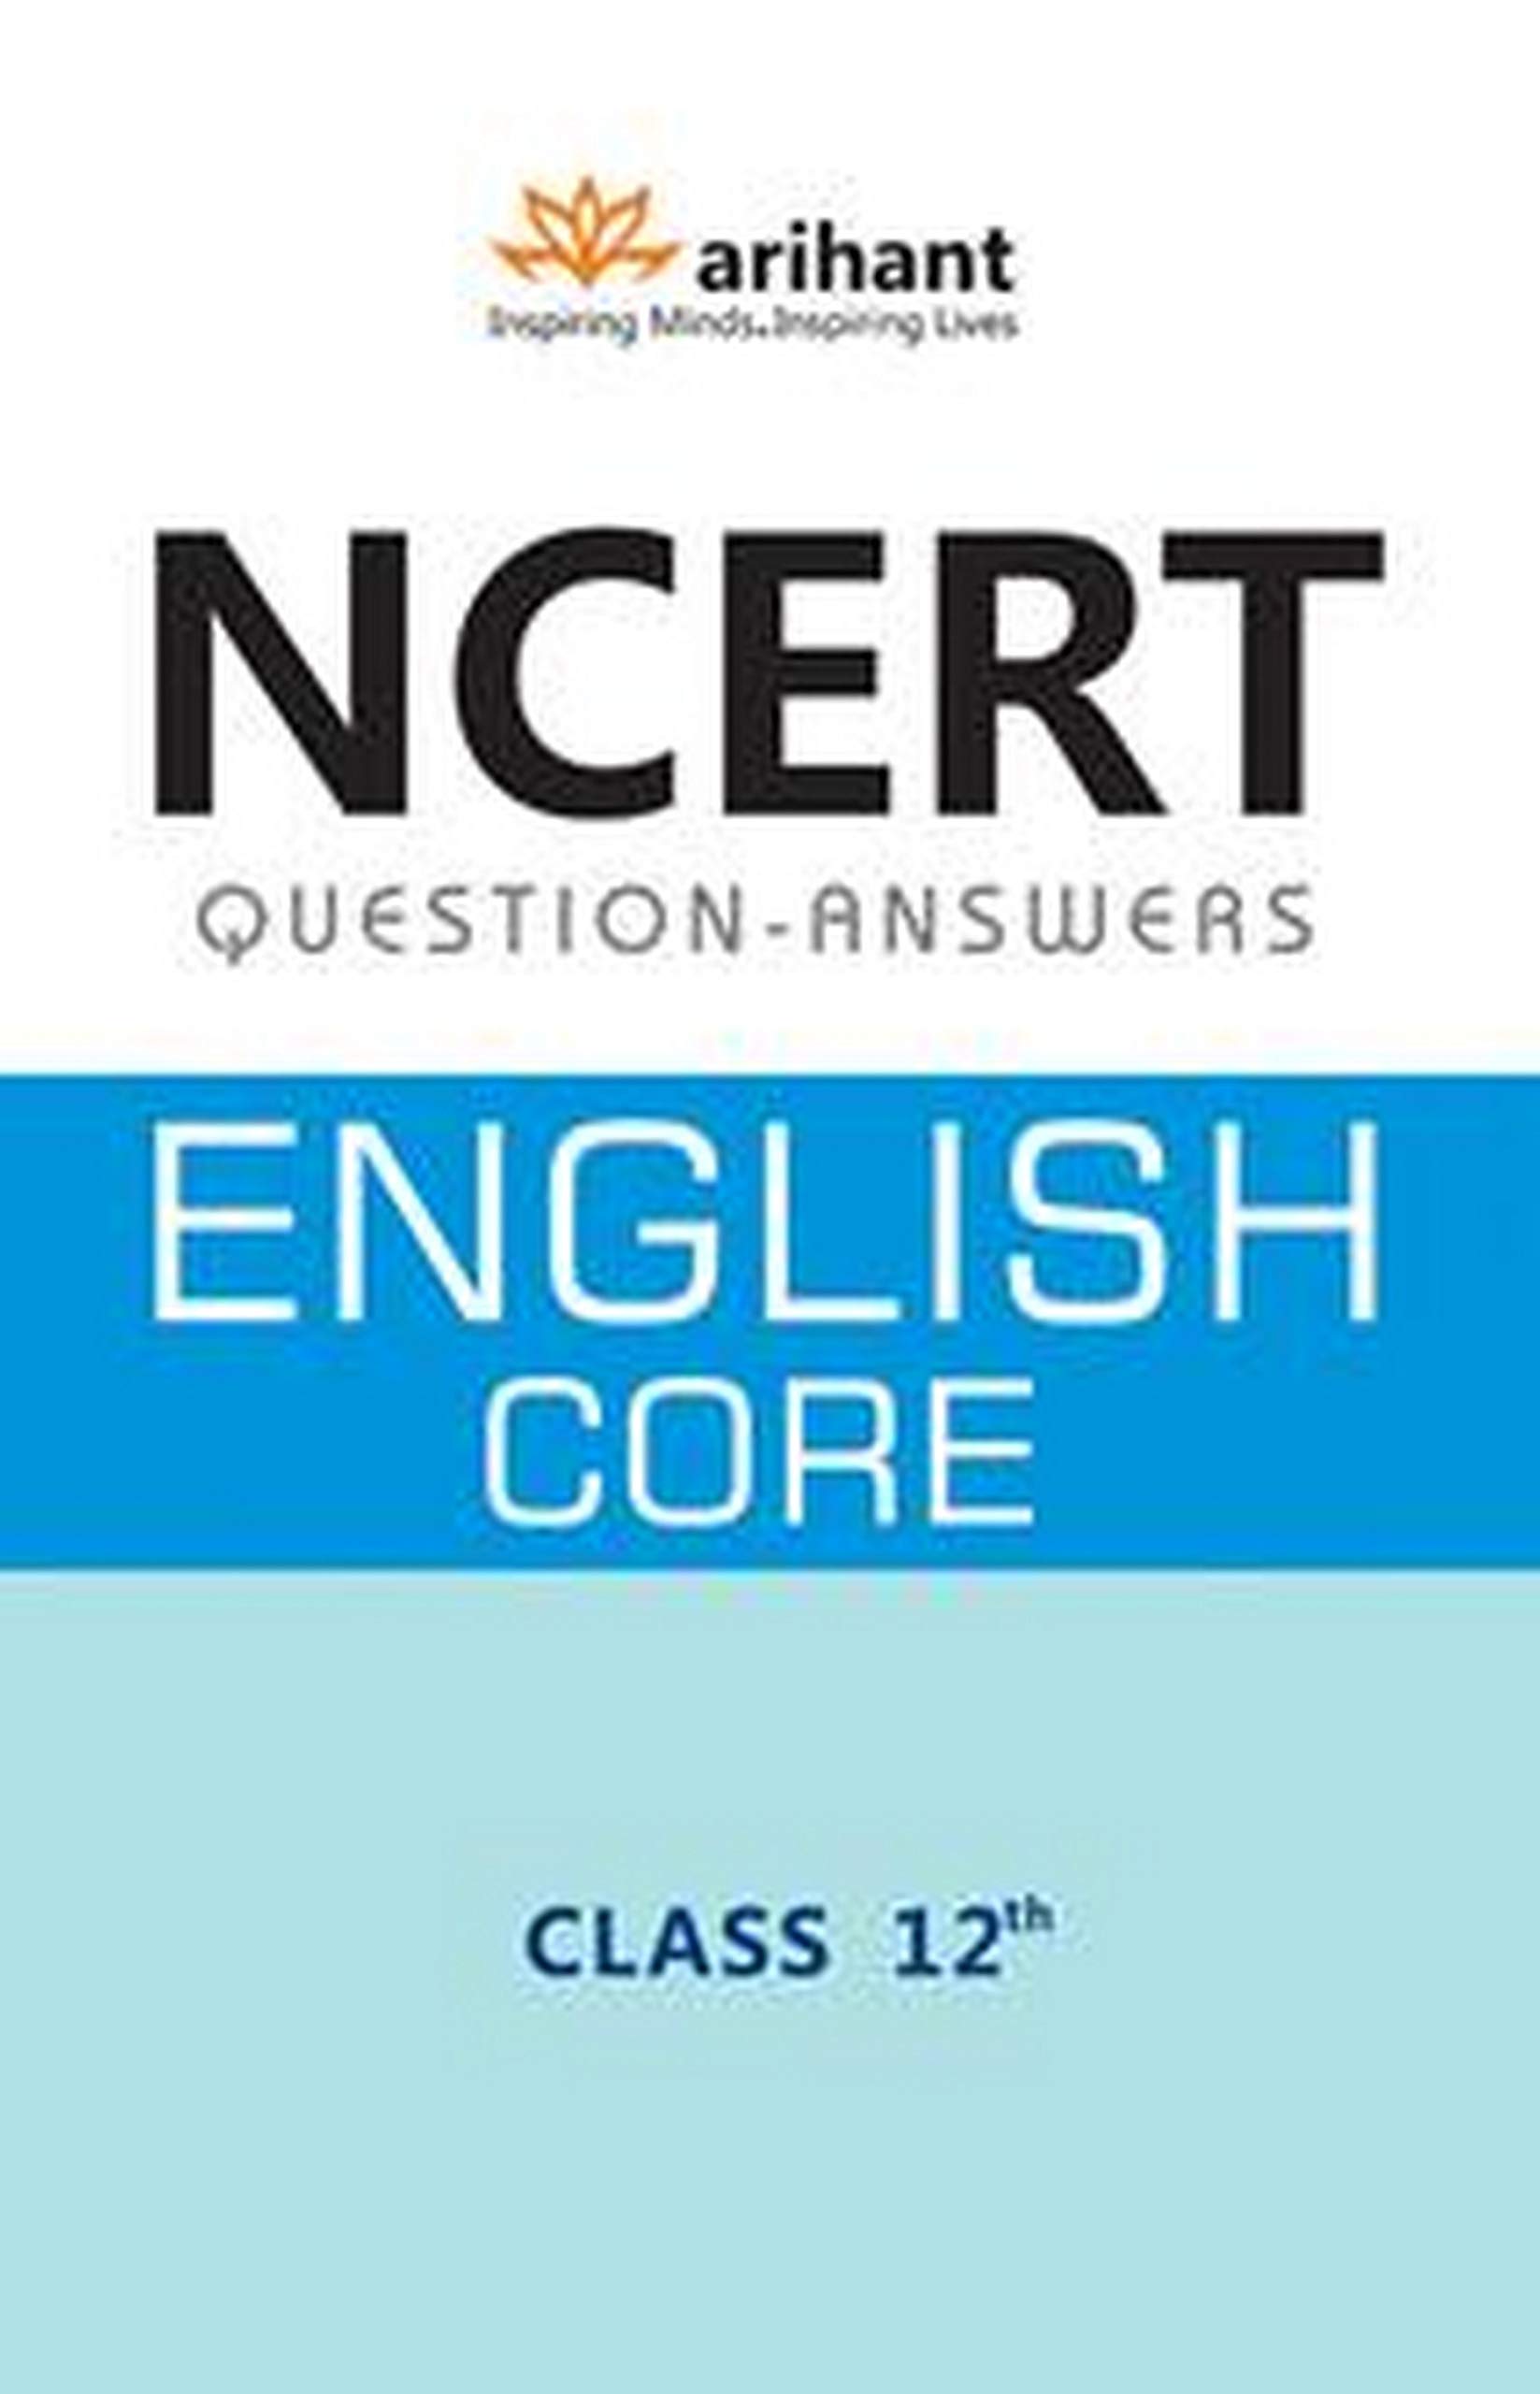 NCERT Questions-Answers - English Core for Class XII